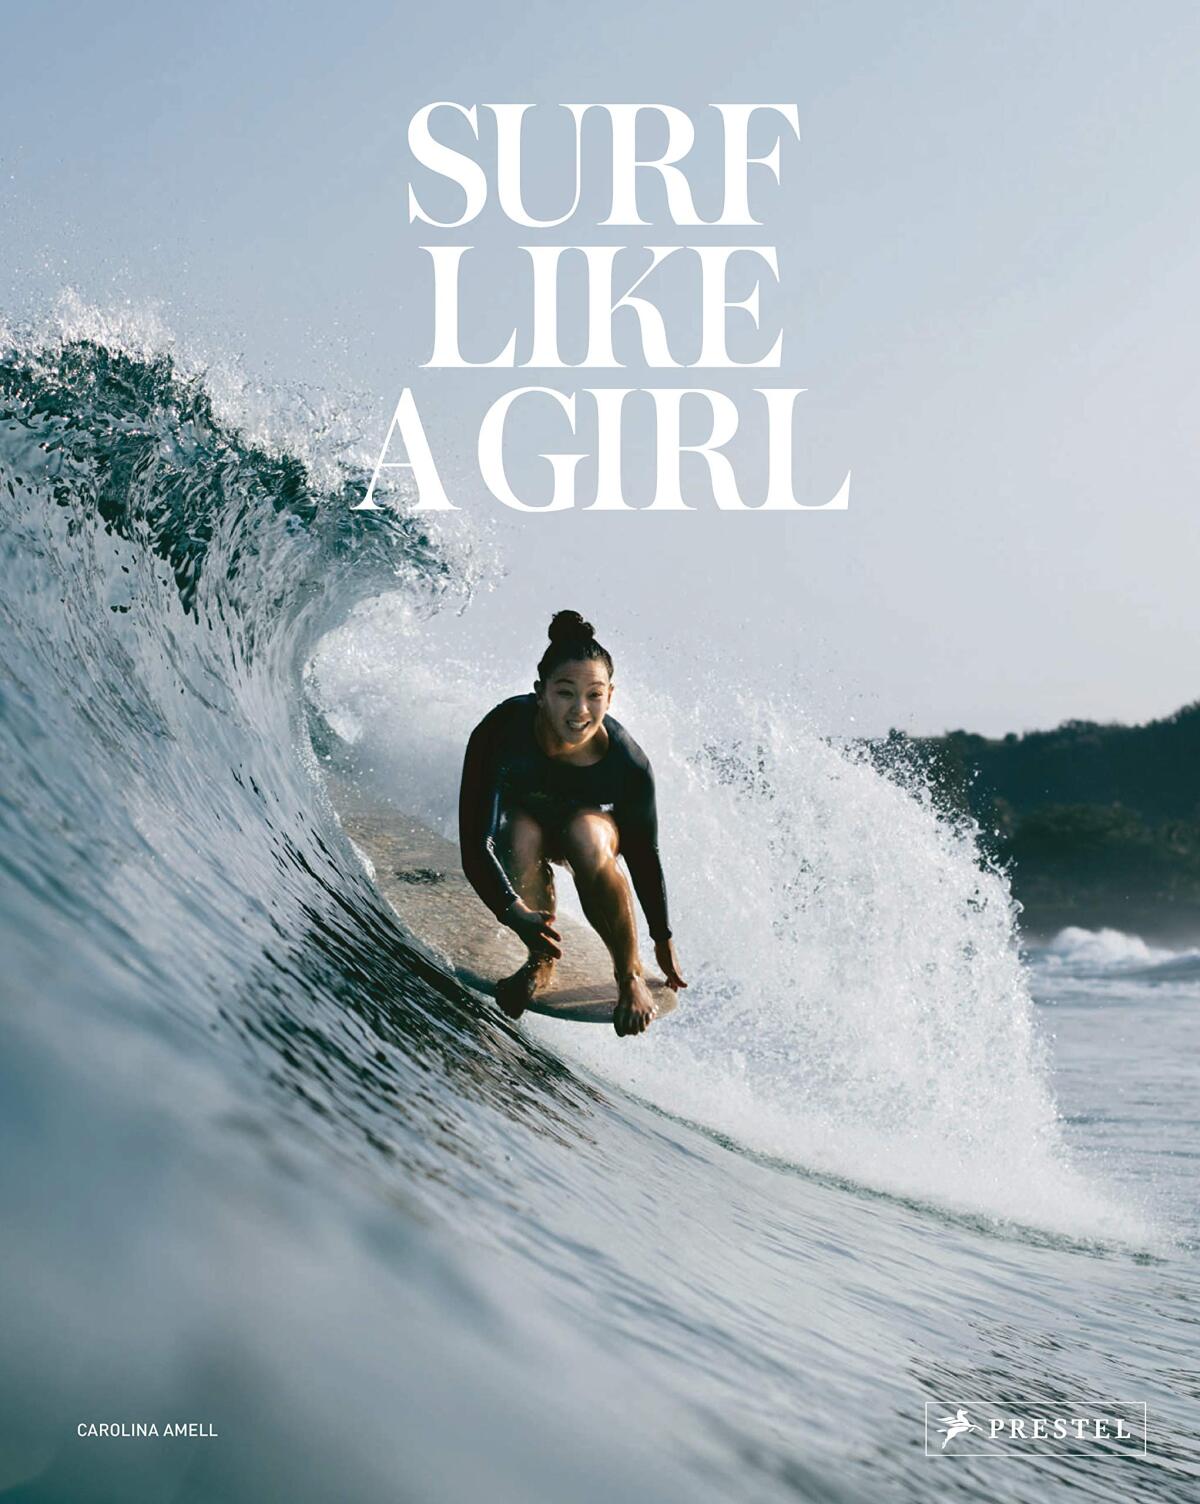 Front cover art of “Surf Like A Girl.”